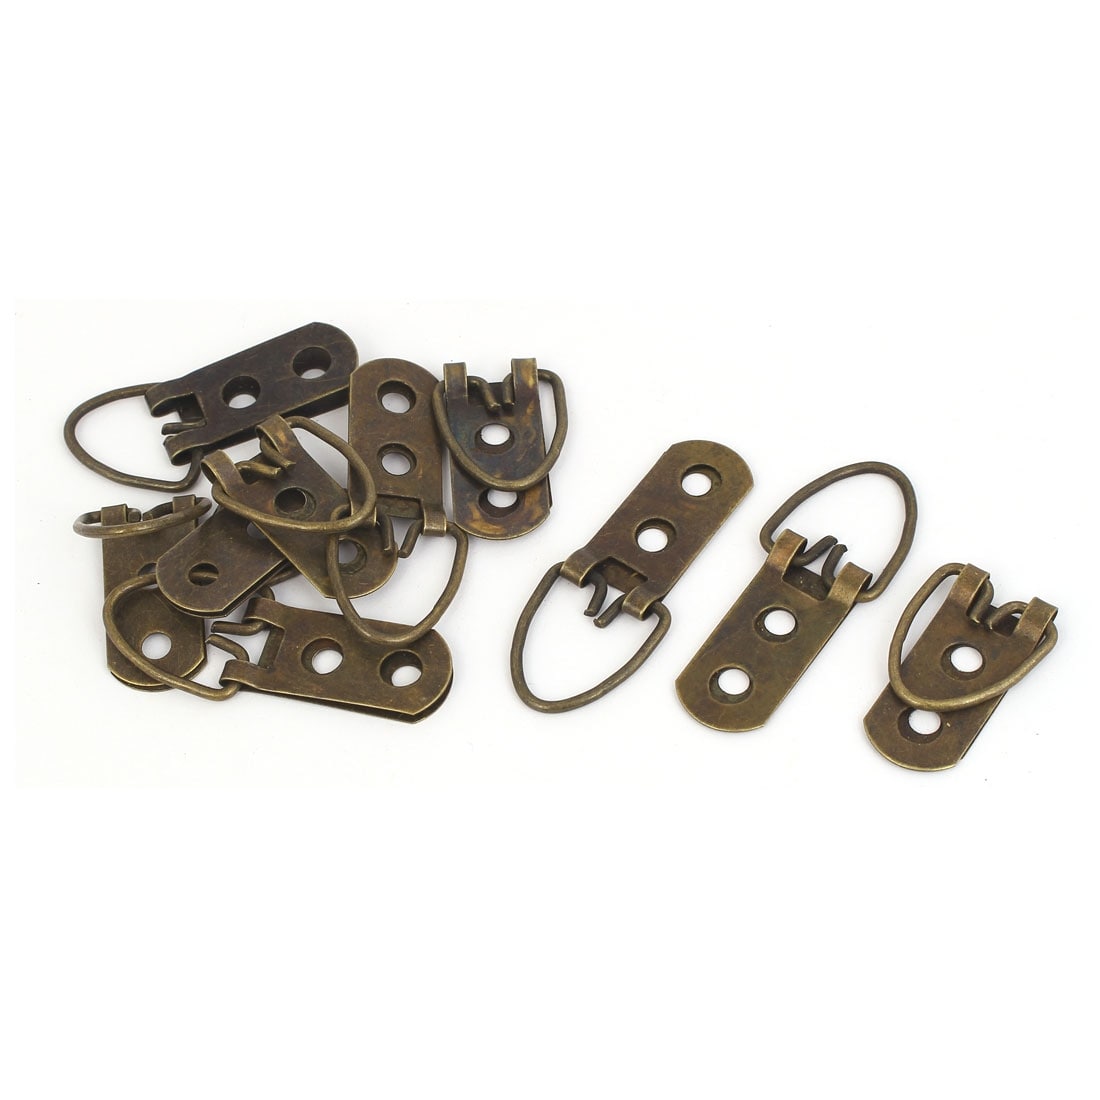 50mm Length Metal Triangle D-Rings Picture Frame Hanging Hanger Hooks 10PCS  - Bronze Tone - Bed Bath & Beyond - 35391473